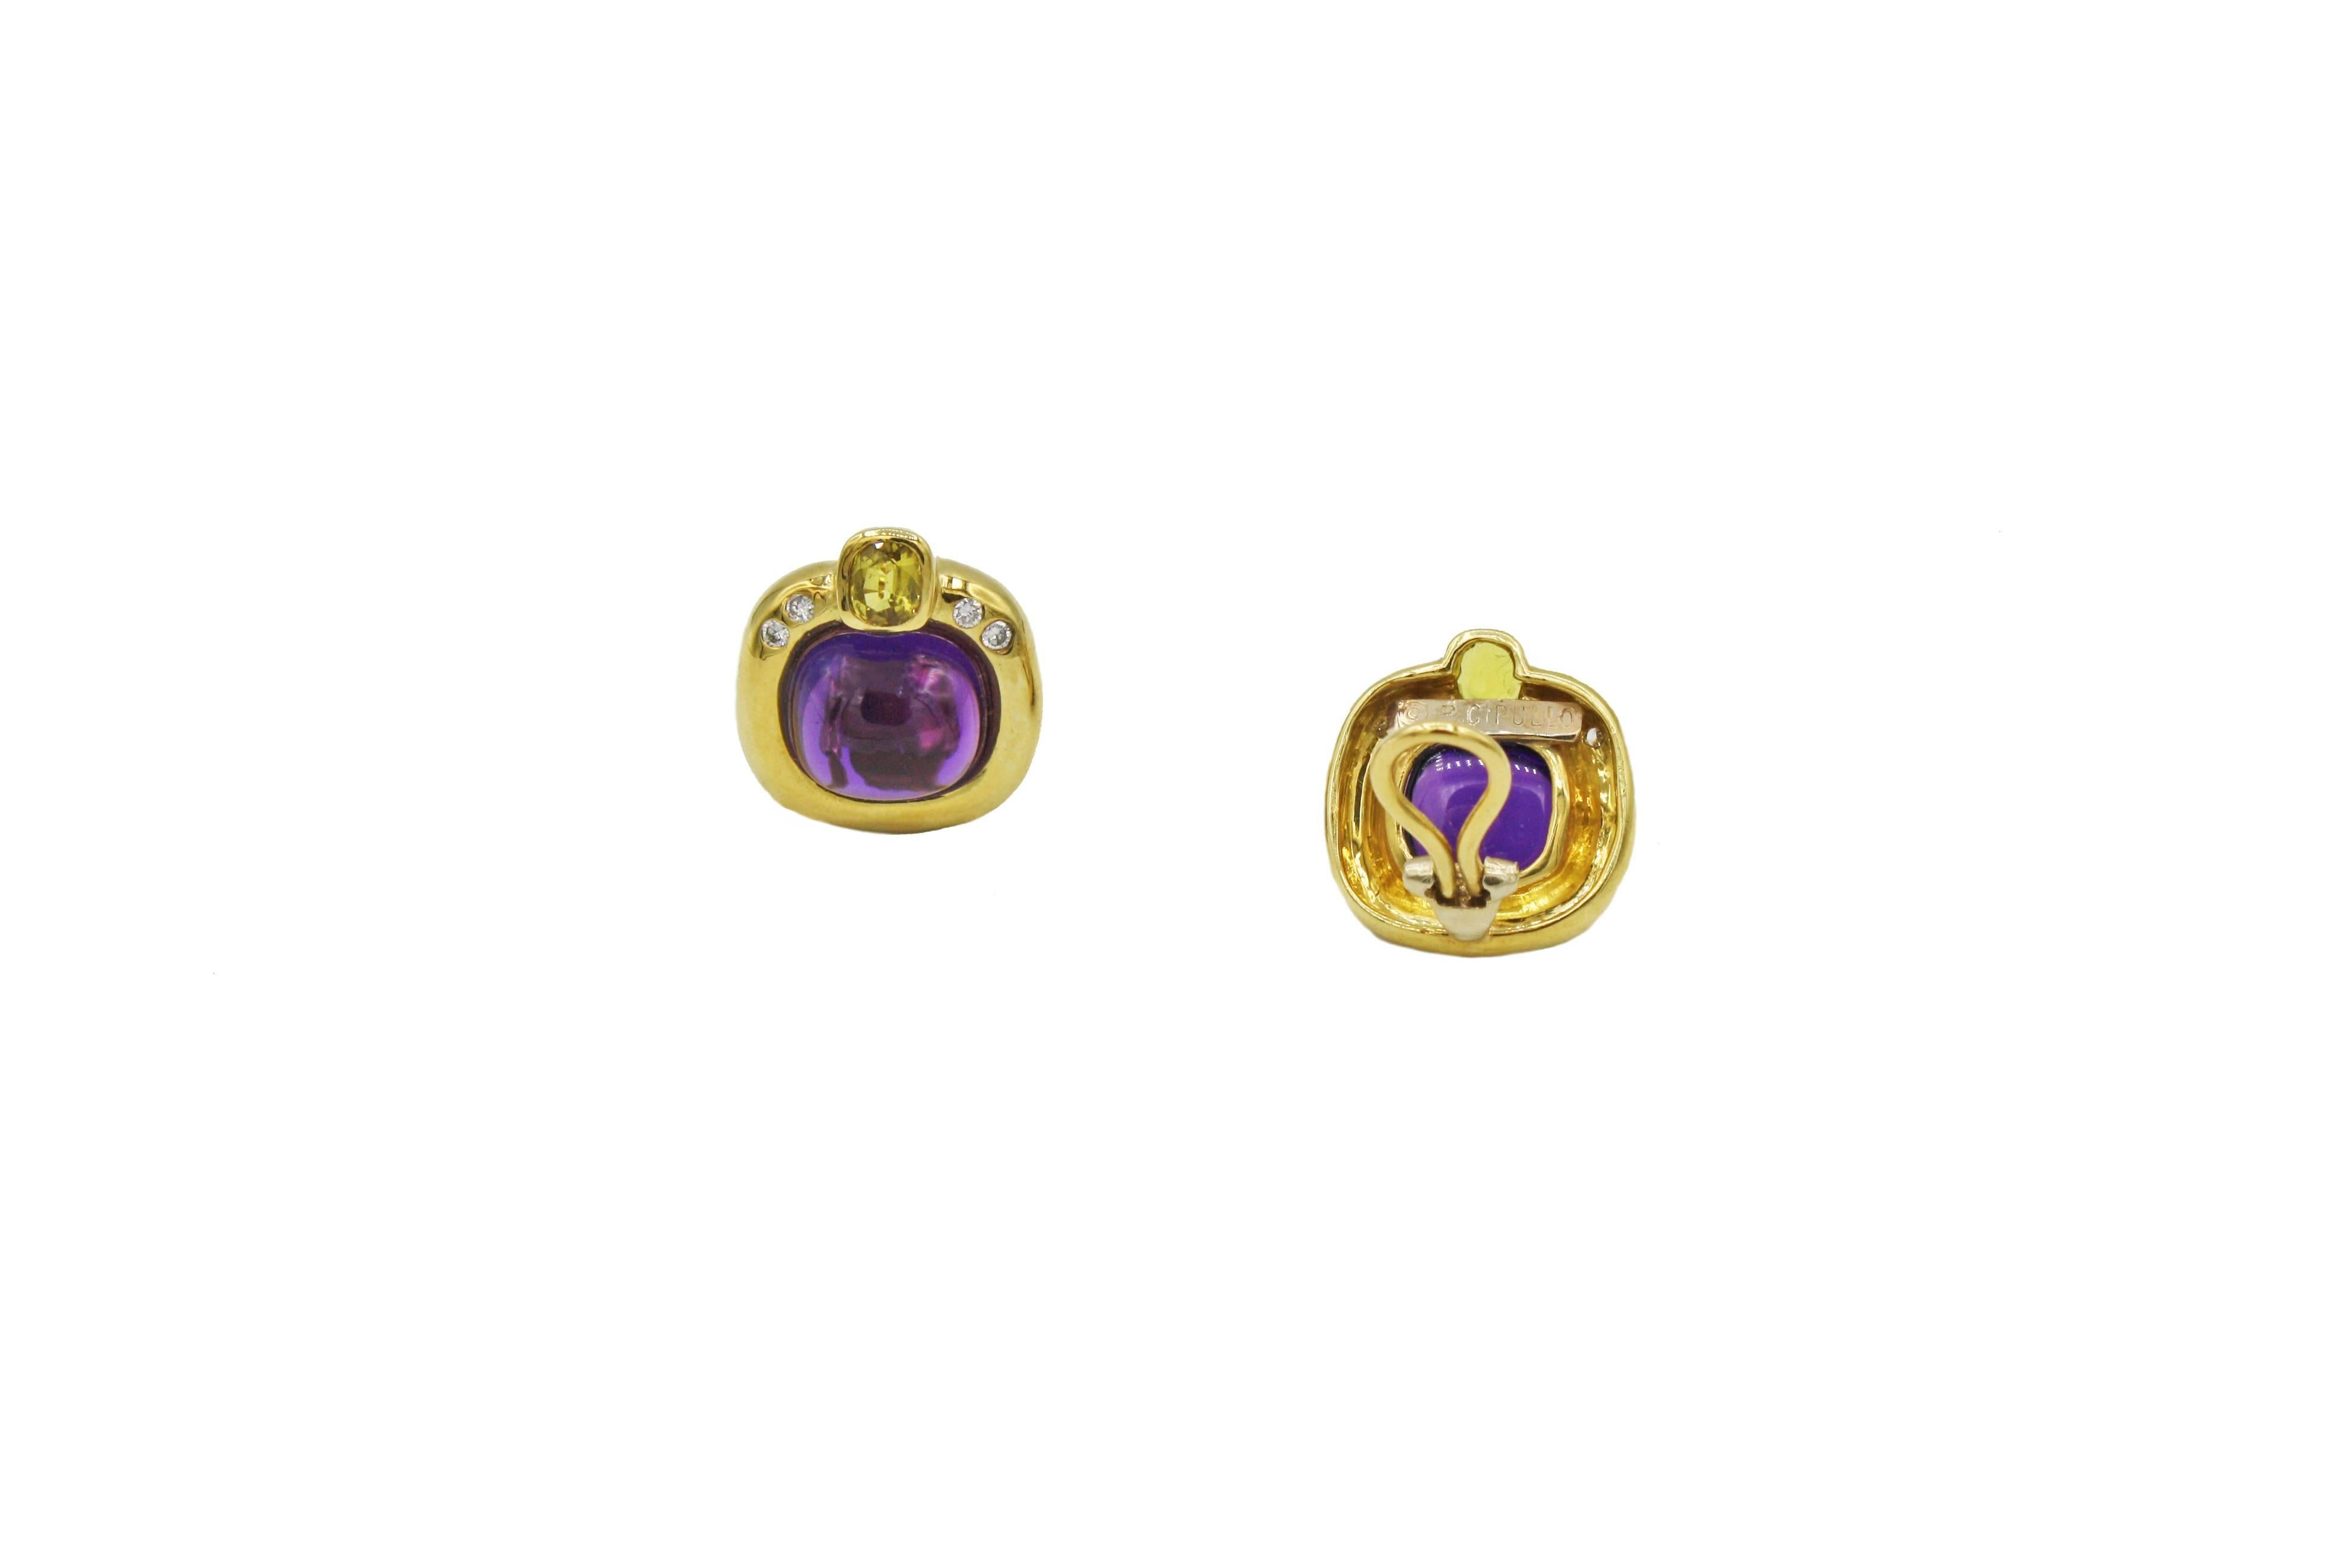 These classic 18kt yellow gold  earrings have .32 ct diamonds (G color, VS clarity), yellow sapphires, and cushion cut amethyst in the center.  